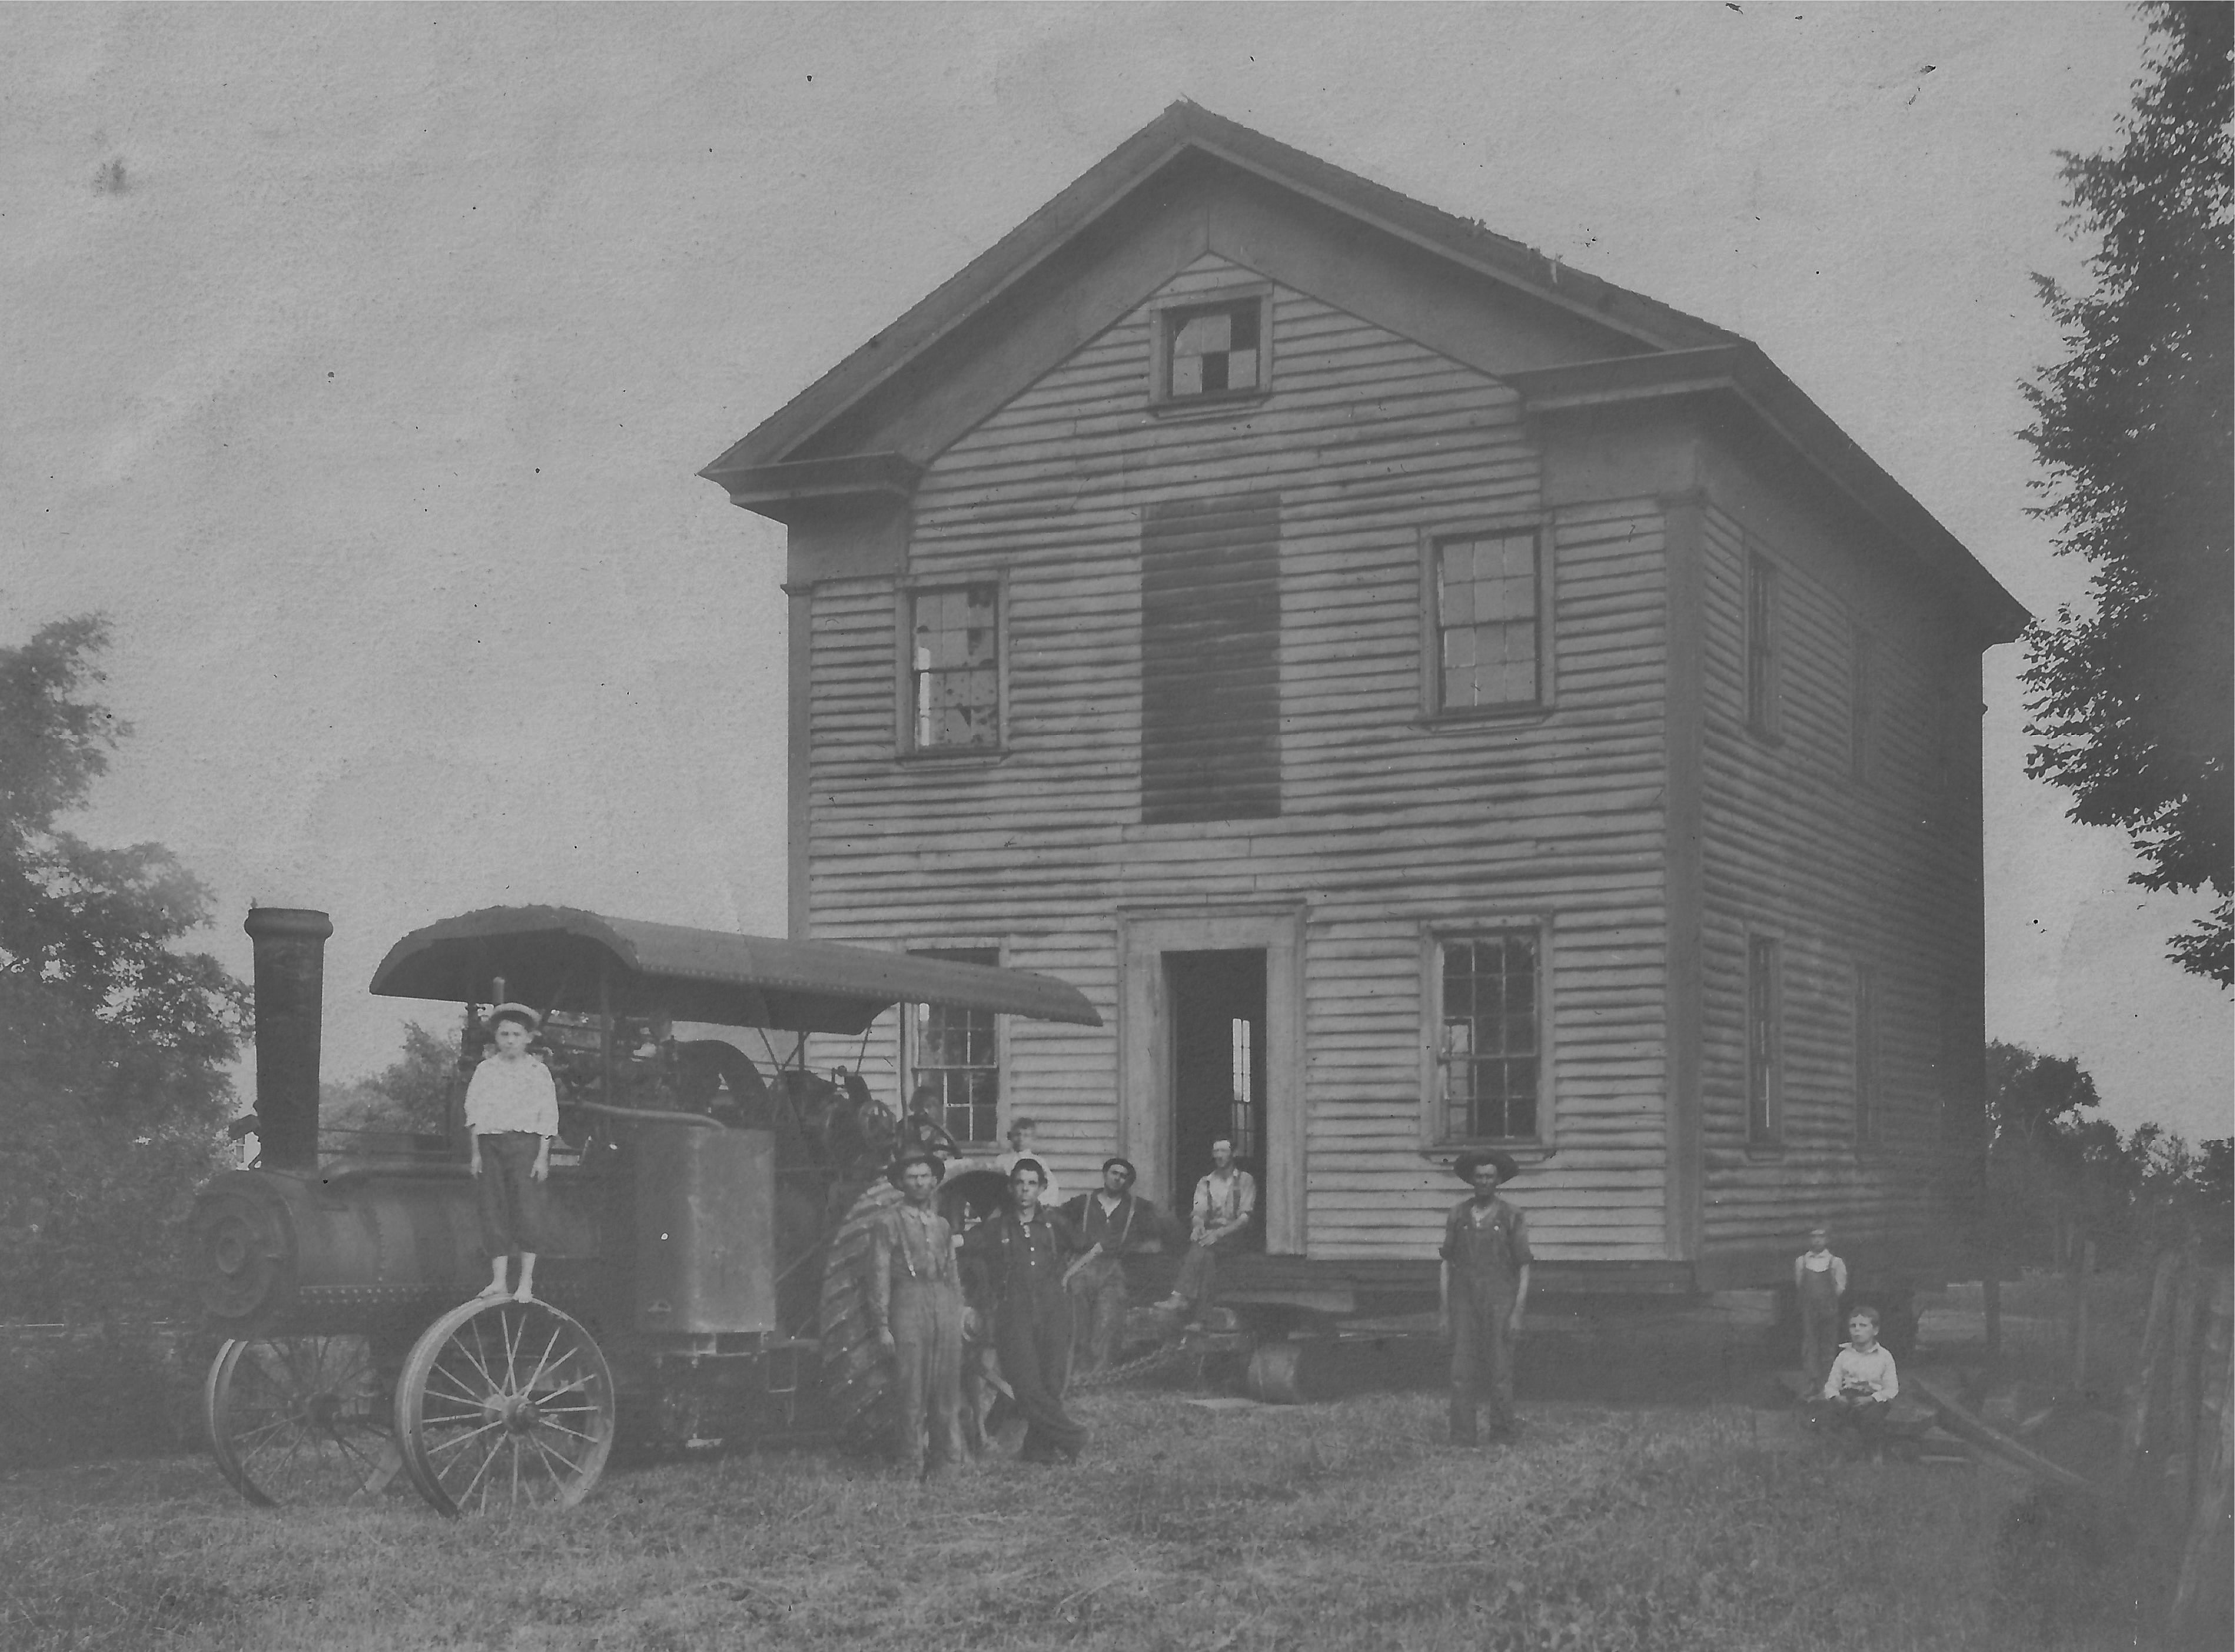 Moving a Ca. 1840 Greek Revival, Temple Front House or Store